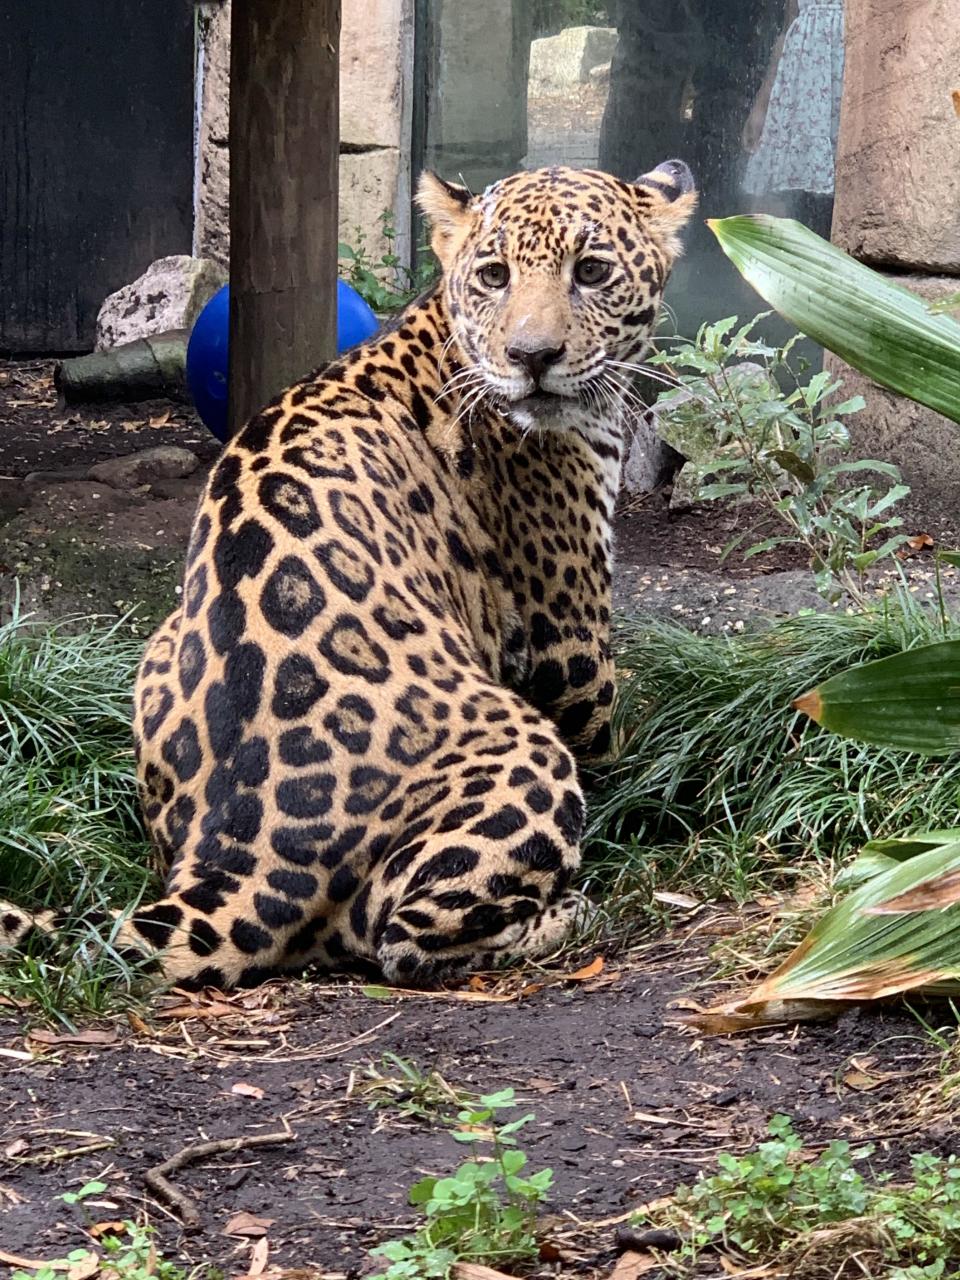 This image provided by the Audubon Zoo shows a seven-month-old female jaguar in New Orleans, Nov. 18, 2021. The New Orleans Audubon Zoo has taken in the jaguar that was rescued from wildlife trafficking. The jaguar was rescued by the U.S. Fish and Wildlife Service and the Association of Zoos and Aquariums contacted the zoo to care for it because it already has the experience and equipment to house jaguars. The zoo received the jaguar on Oct. 14. (Audubon Zoo via AP)